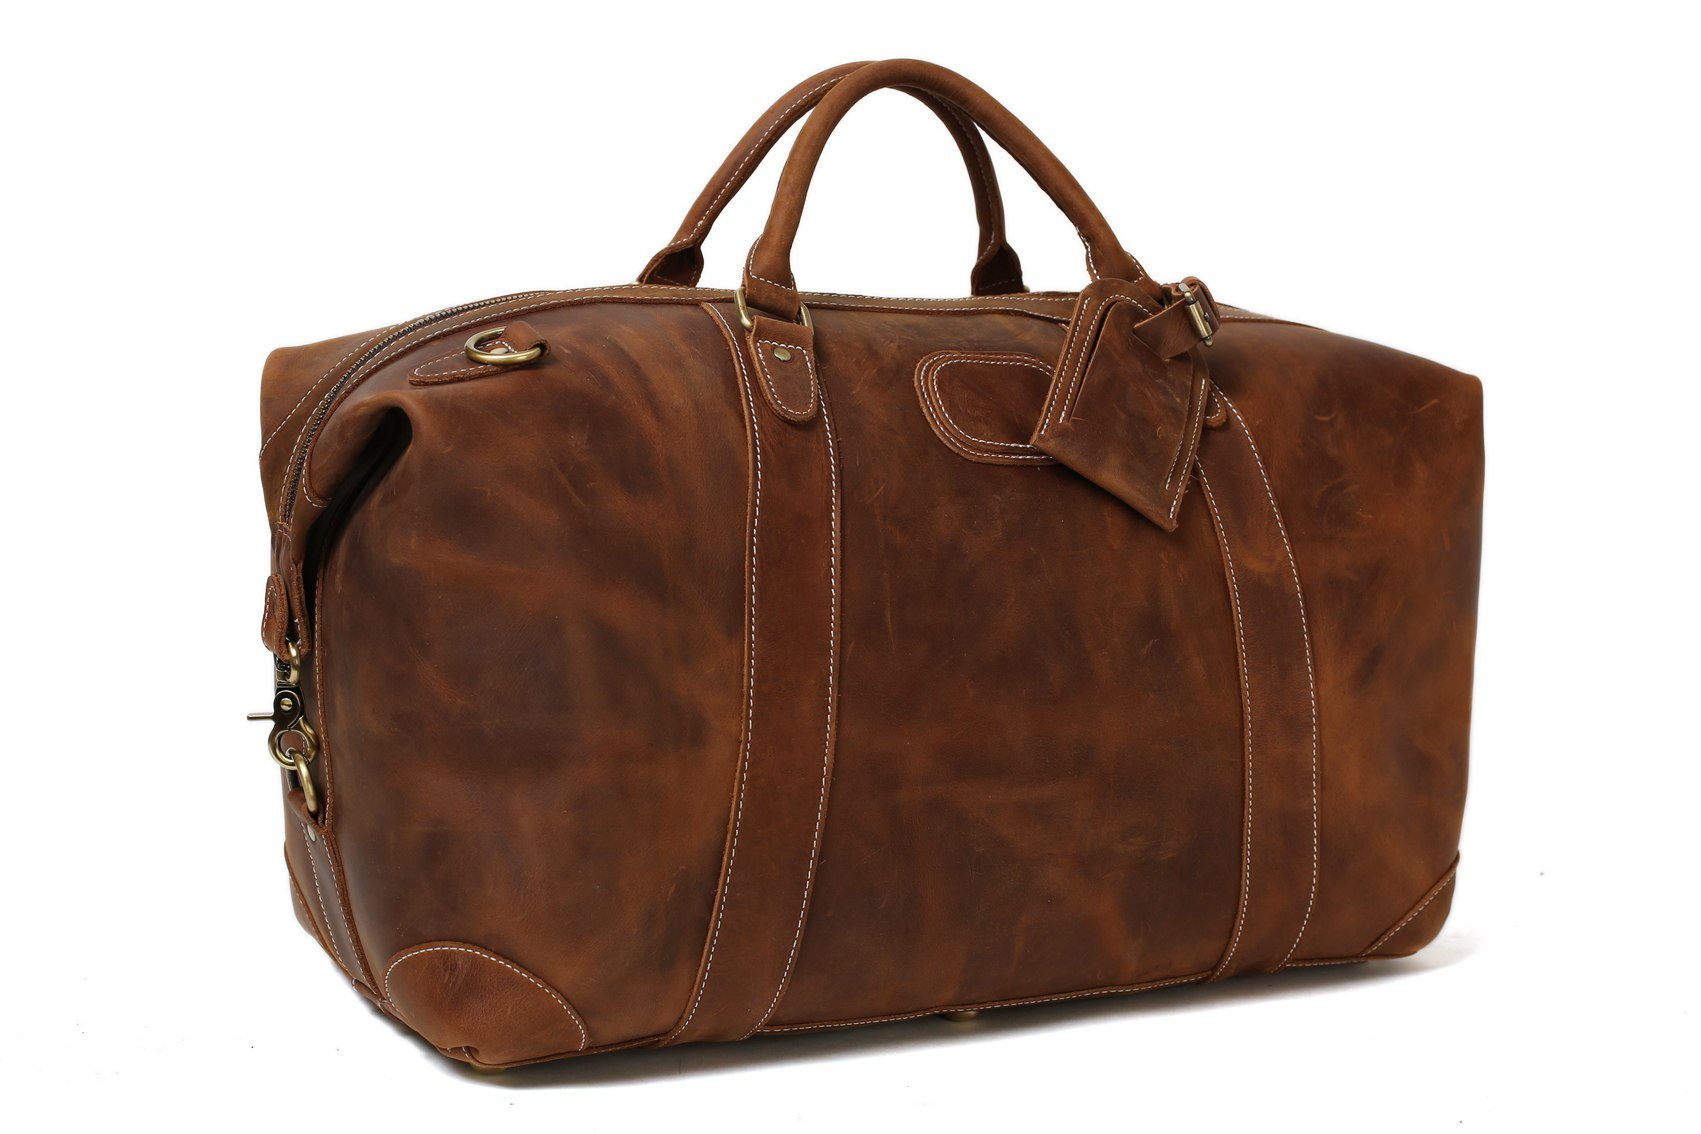 Handcrafted Vintage Style Top Grain Calfskin Leather Travel Bag Duffle Bag Holdall Luggage DZ07 ...